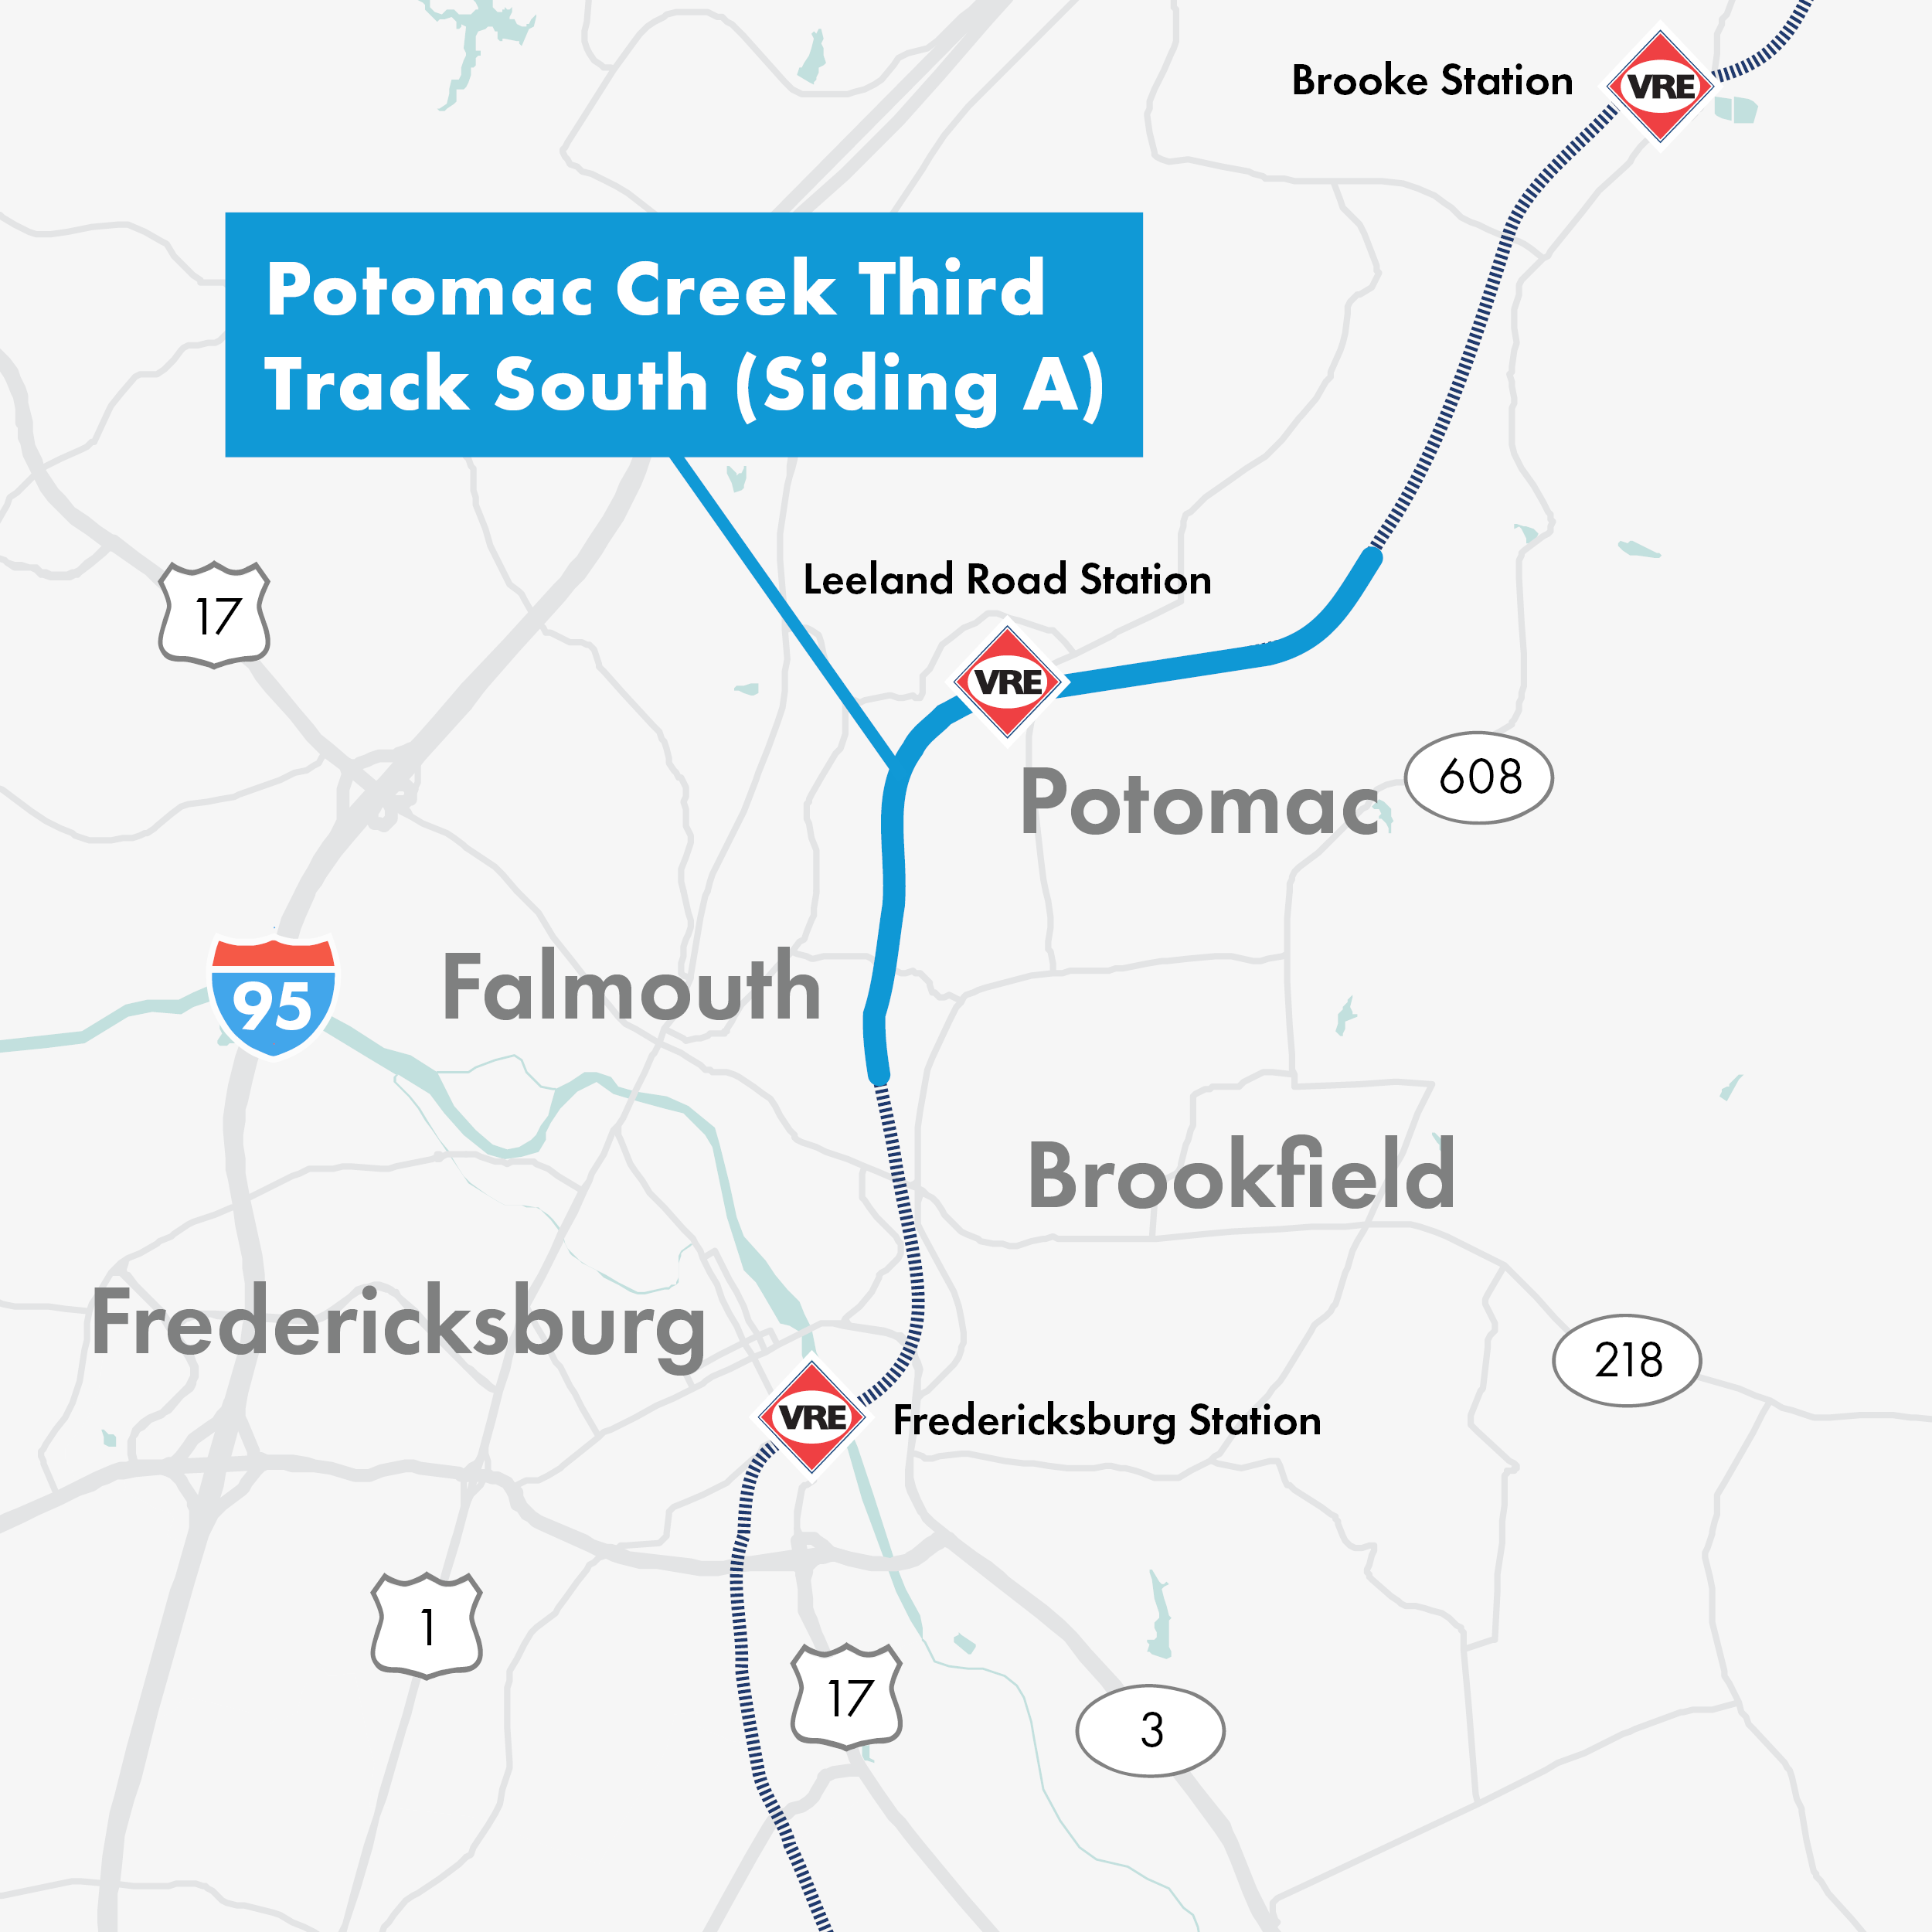 Map of Potomac Creek Third Track South (Siding A) Project